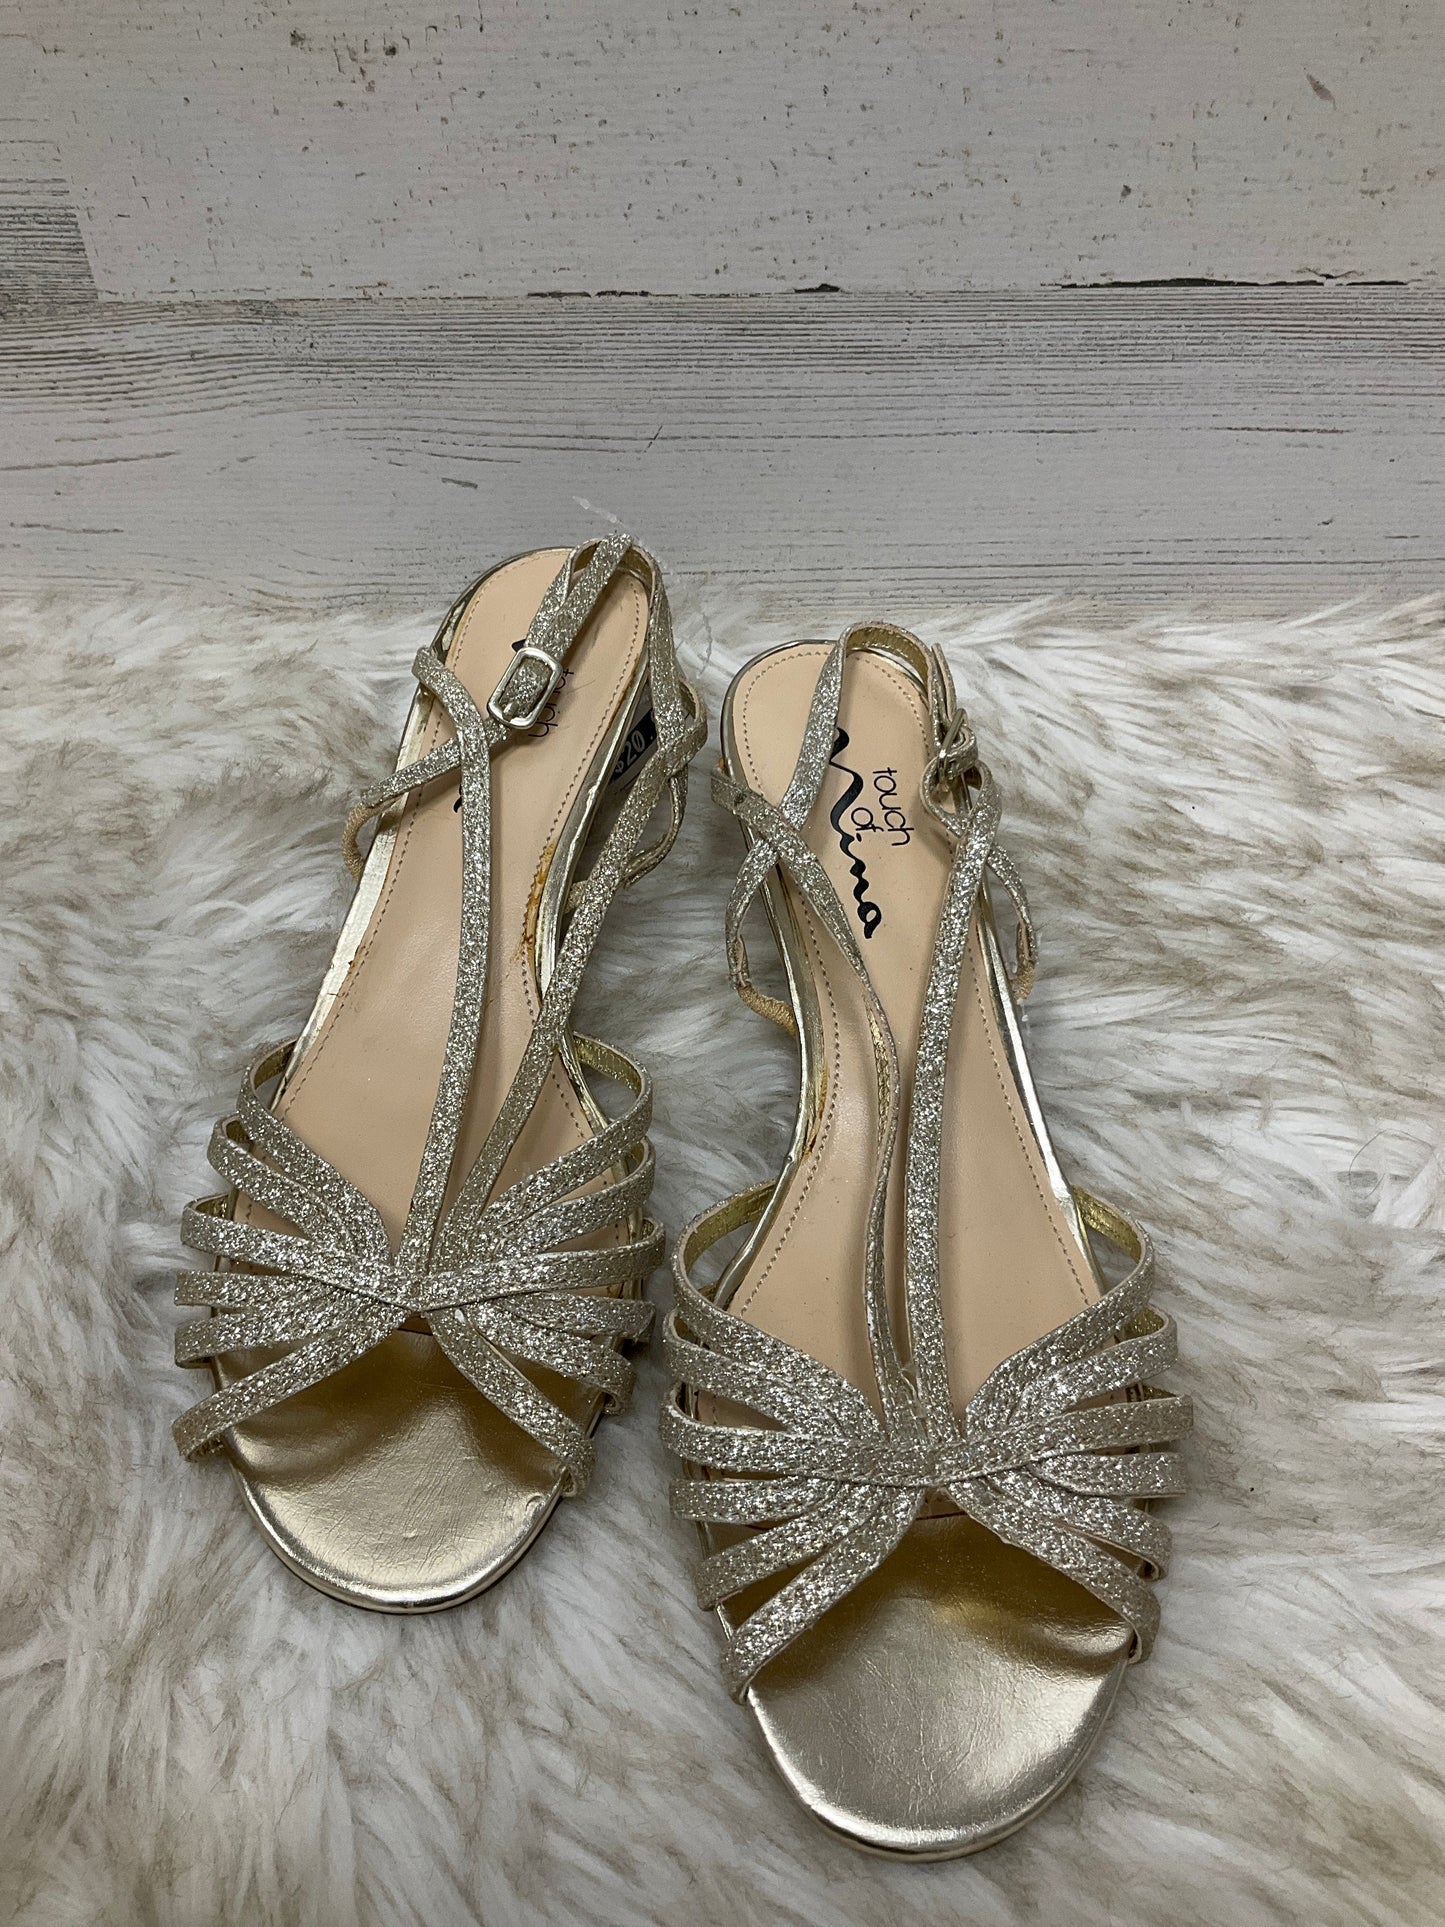 Sandals Heels Wedge By Nina  Size: 7.5